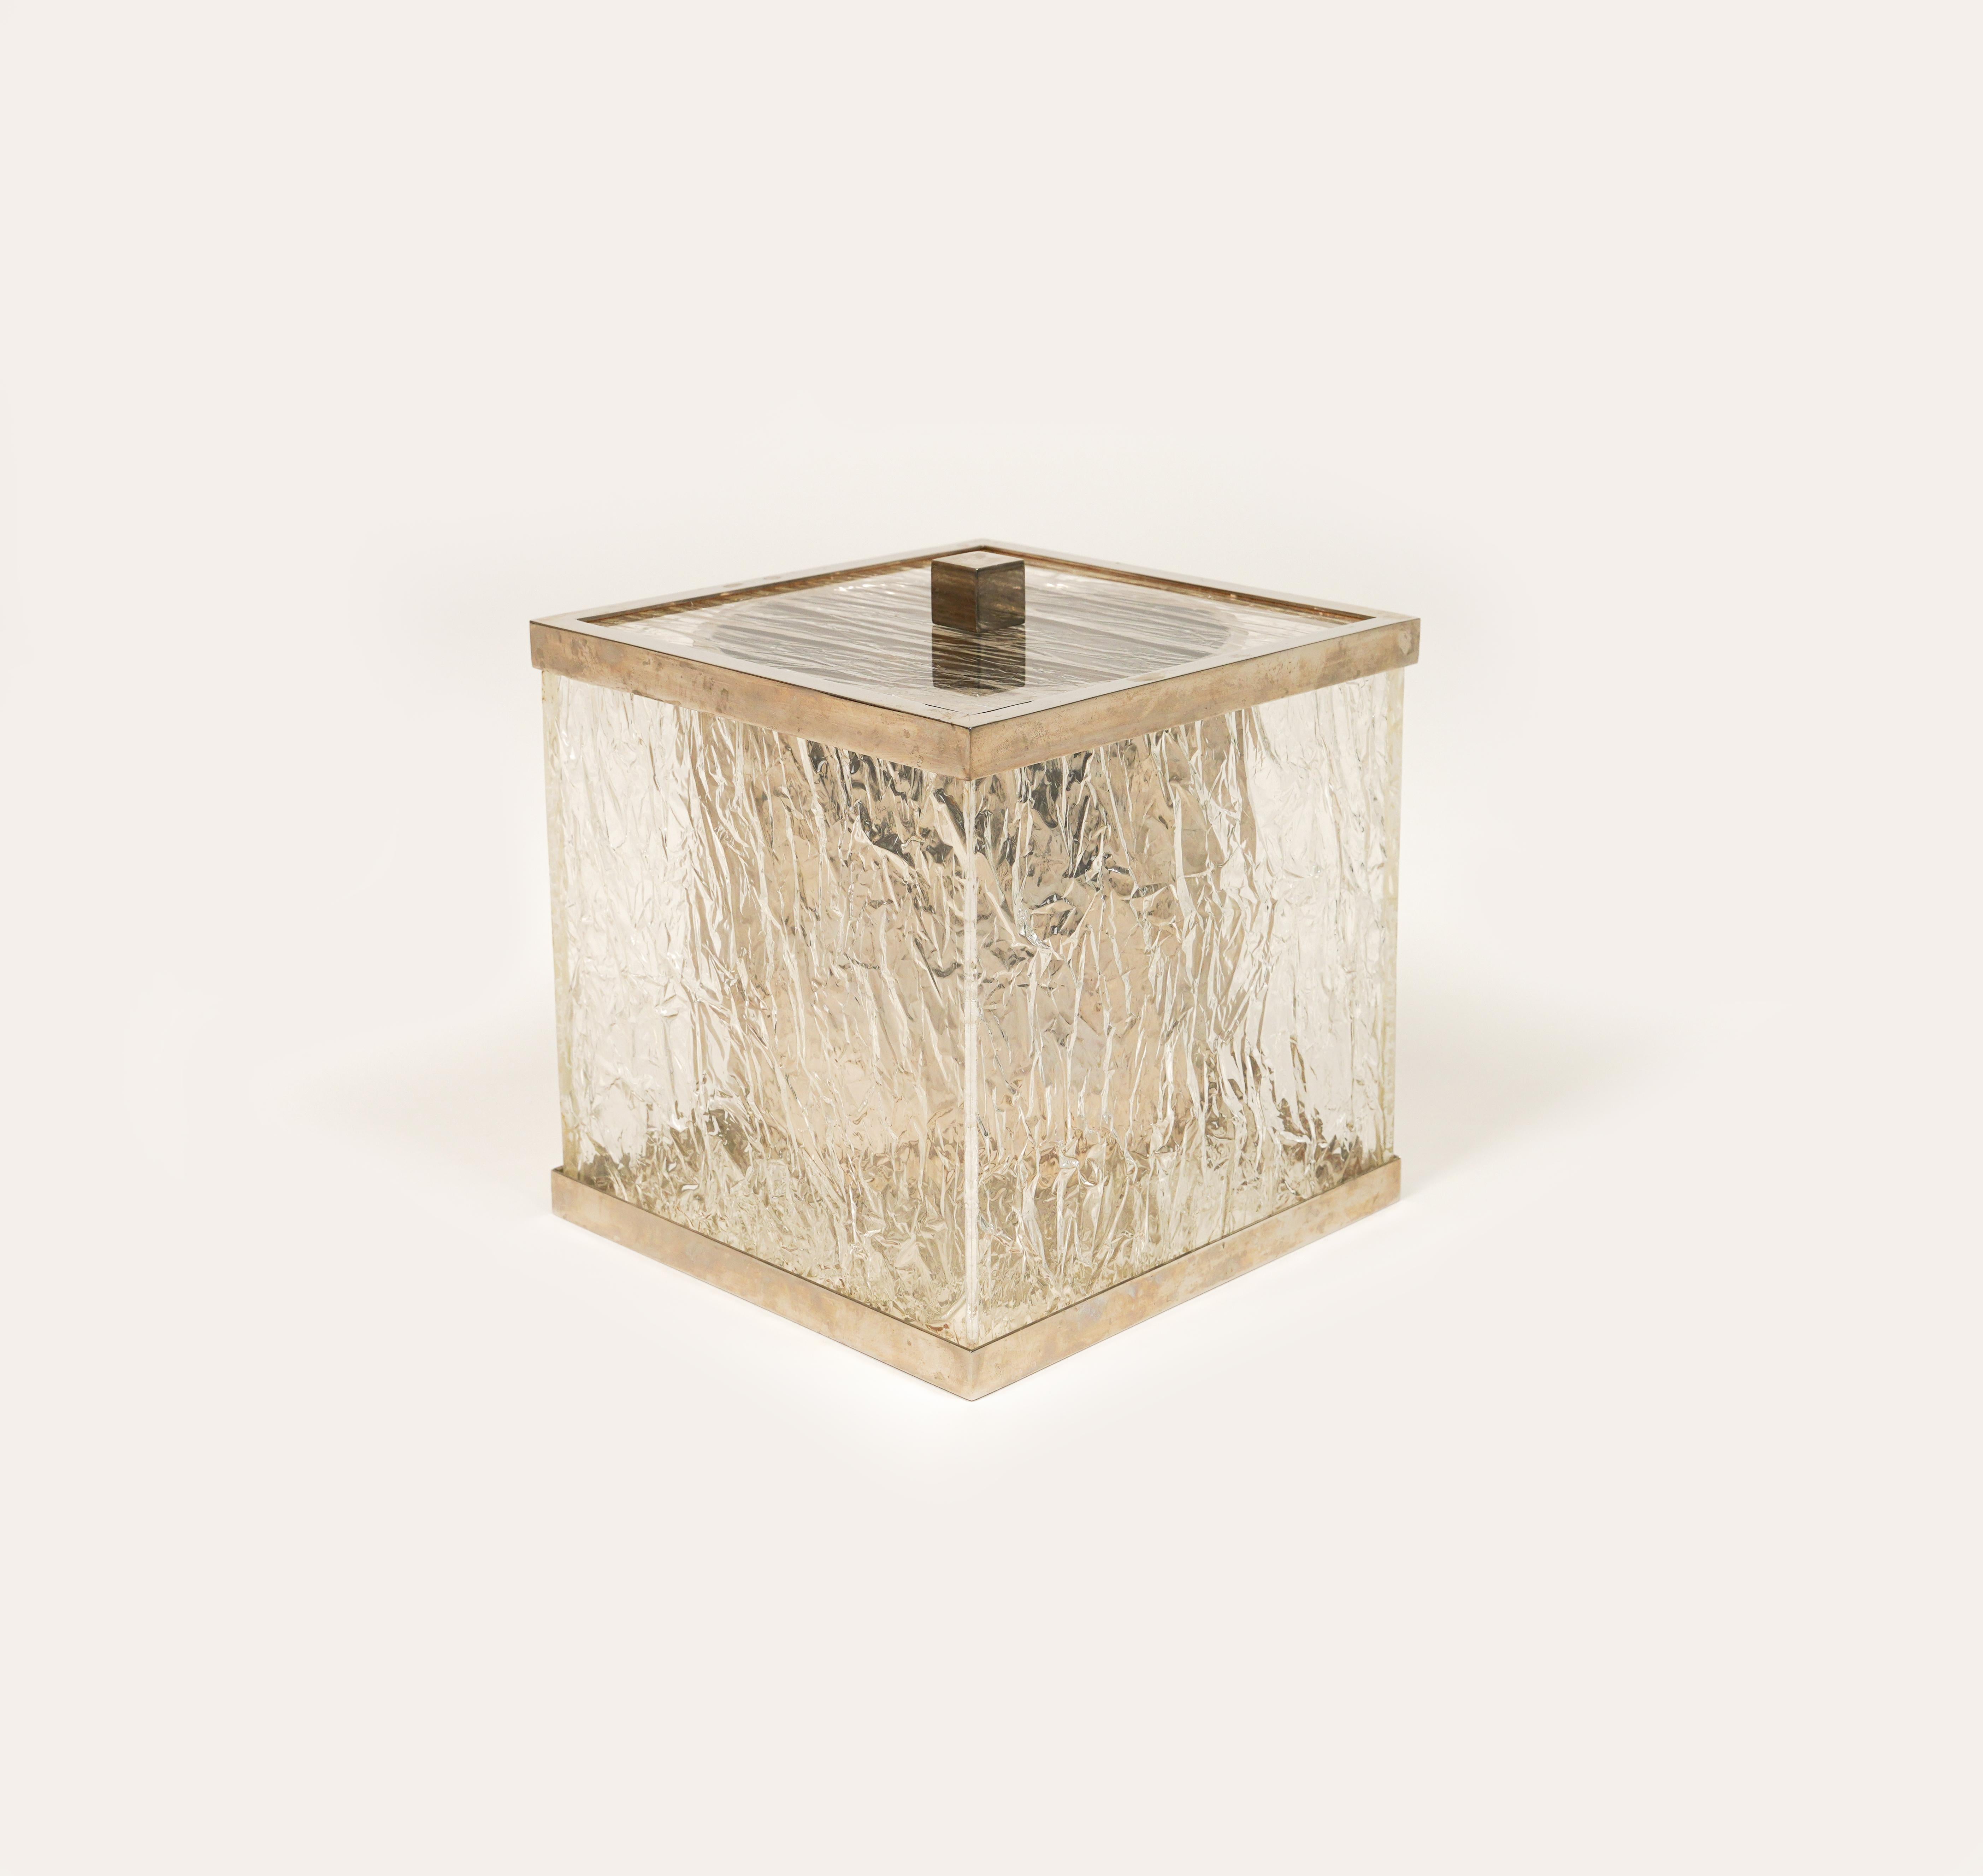 Midcentury amazing ice bucket in lucite ice effect and steel in the style of the Italian designer Willy Rizzo.

Made in Italy in the 1970s.